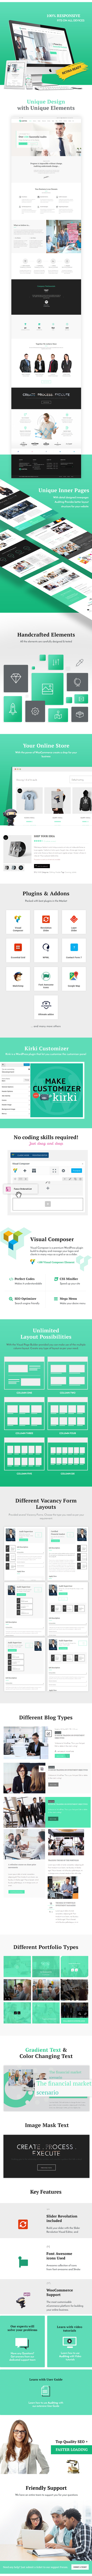 Auditing | Accounting Consultant, Finance WordPress Theme - 1